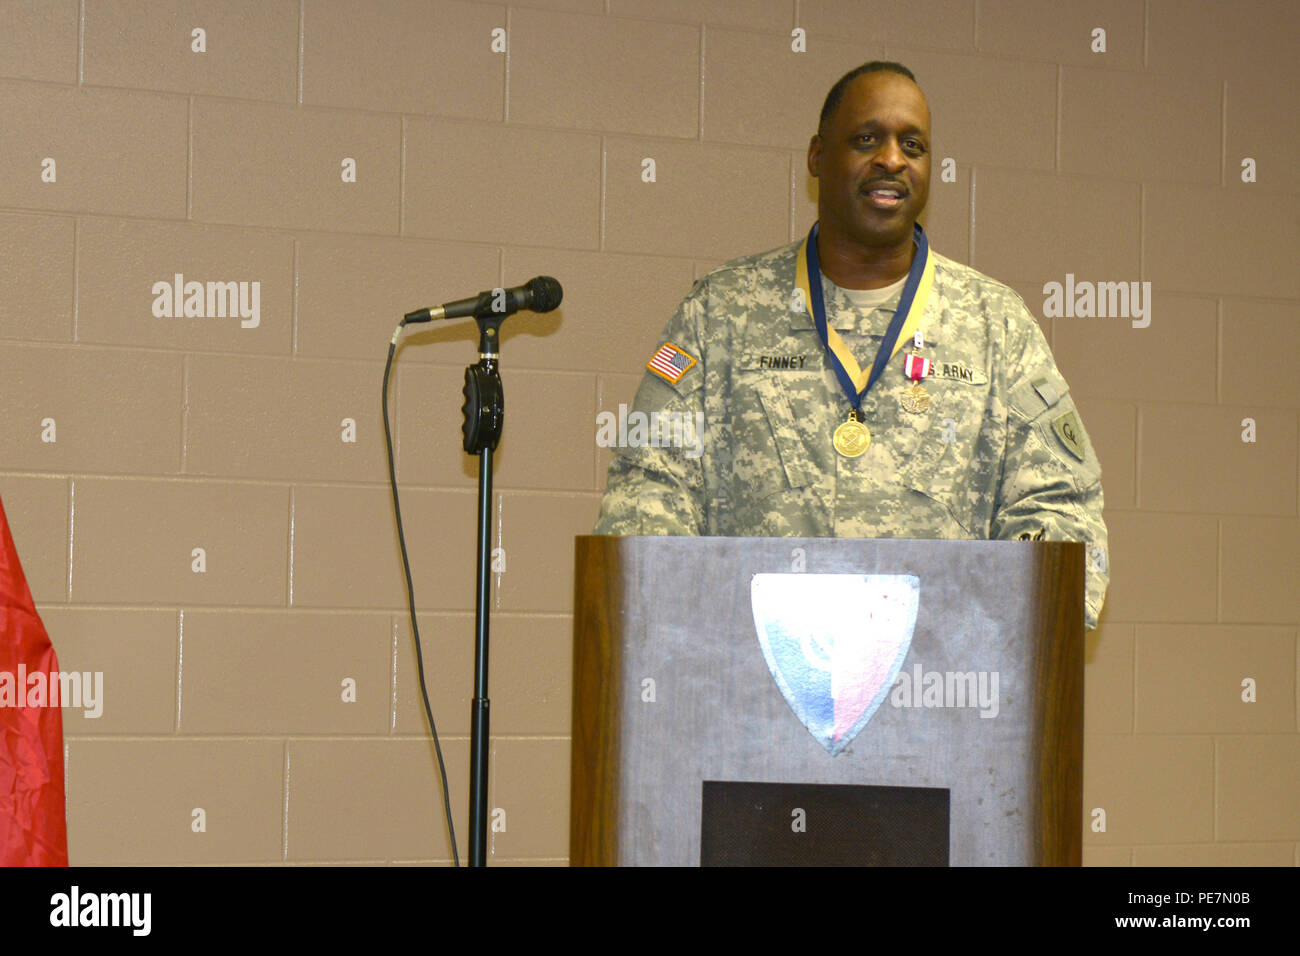 Indiana Army National Guard Lt. Col. Walter Finney speaks at his retirement ceremony at the Cyclone Division Armory in Indianapolis, Saturday, Oct. 17, 2015. Finney retired with 30 years in the Indiana National Guard last serving as the 38th Infantry Division’s headquarters battalion’s commander. (Photo by Sgt. 1st Class Jeff Lowry) Stock Photo